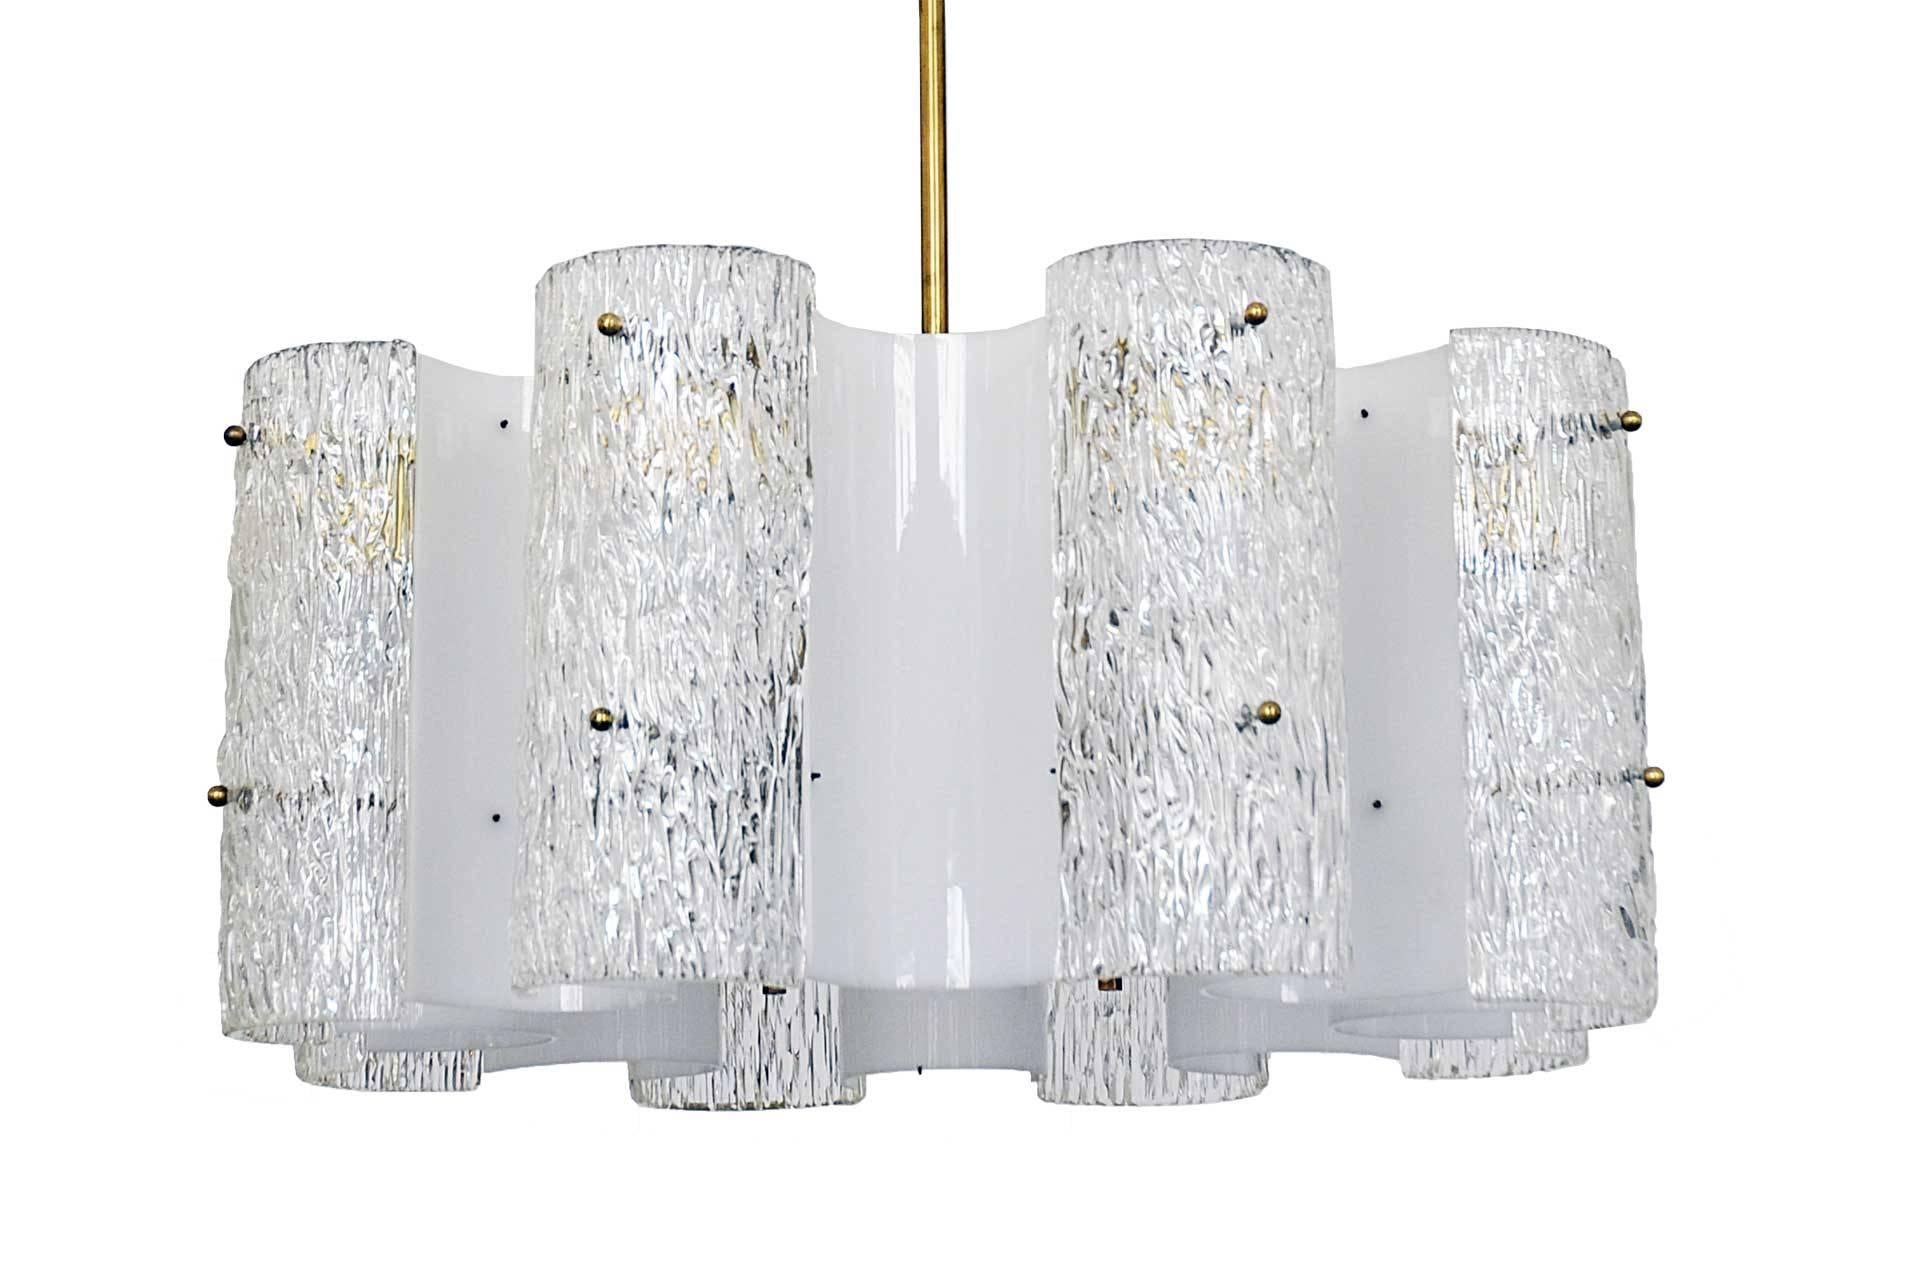 This chandelier was designed by J.T Kalmar in 1950s. The lampshade is made of molded glass and plexiglass. The lamp rod is made of brass.